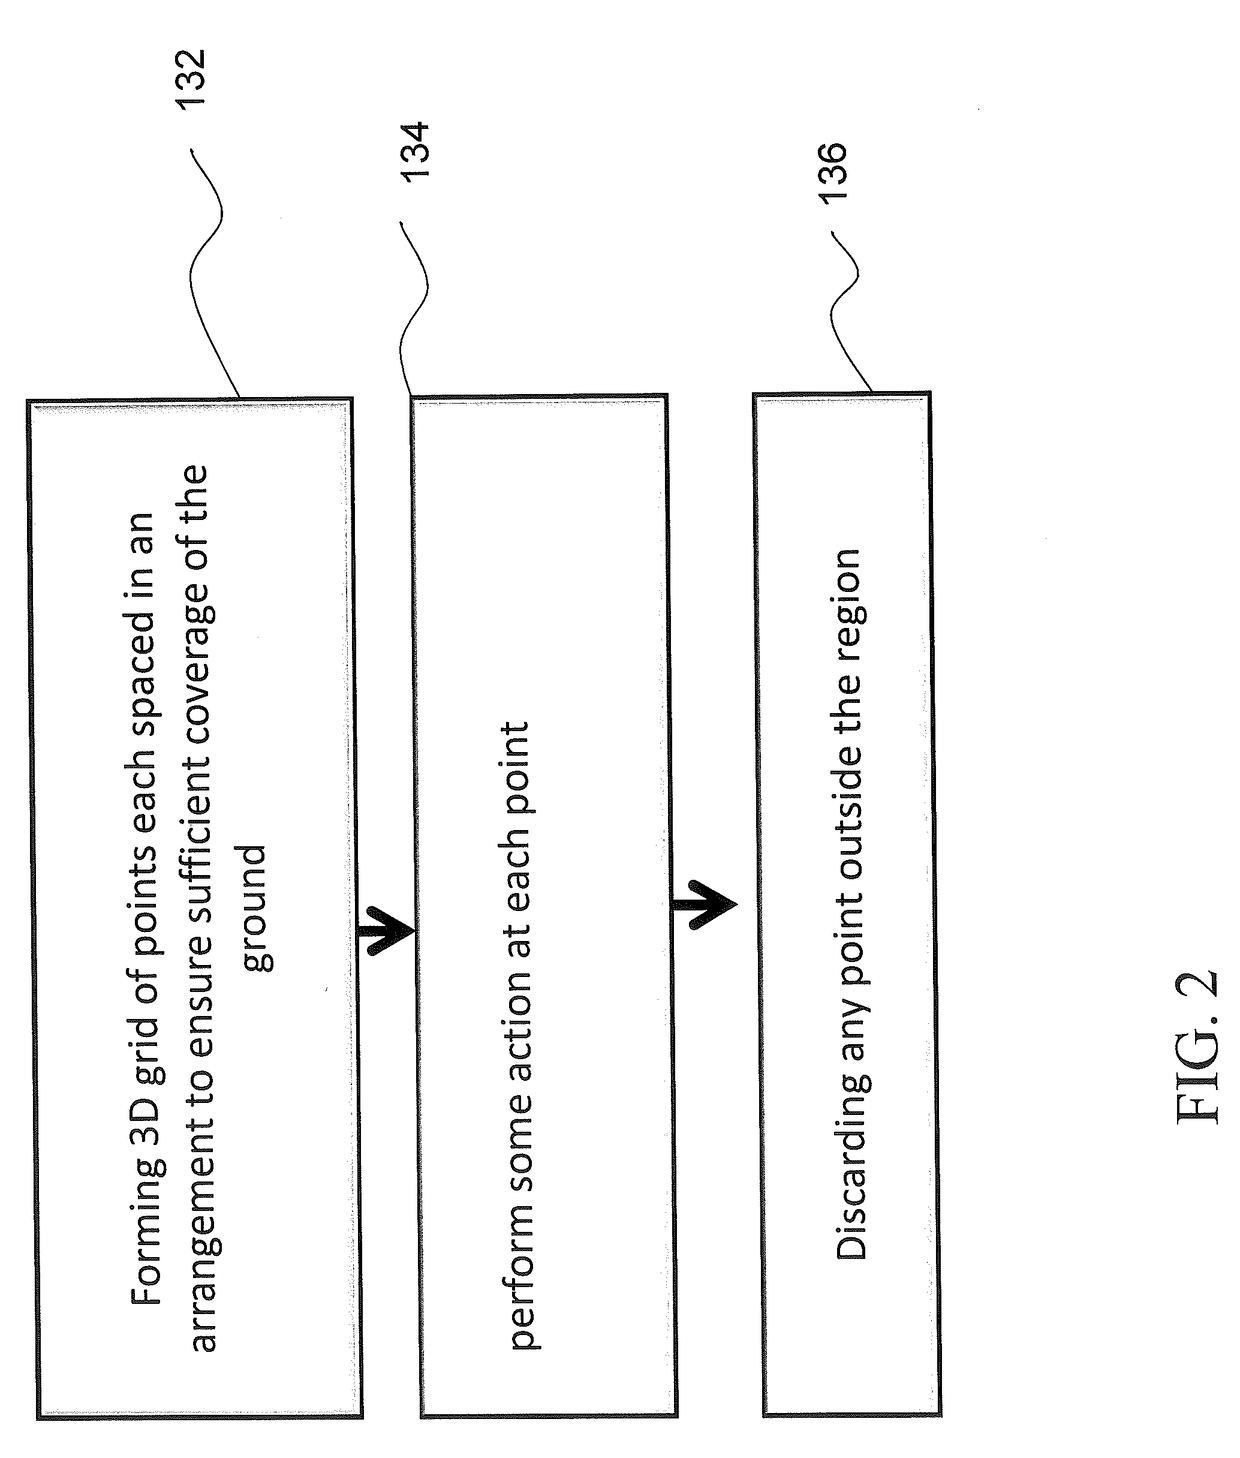 METHOD OF OPTIMIZED PATH PLANNING FOR UAVs FOR THE PURPOSE OF GROUND COVERAGE